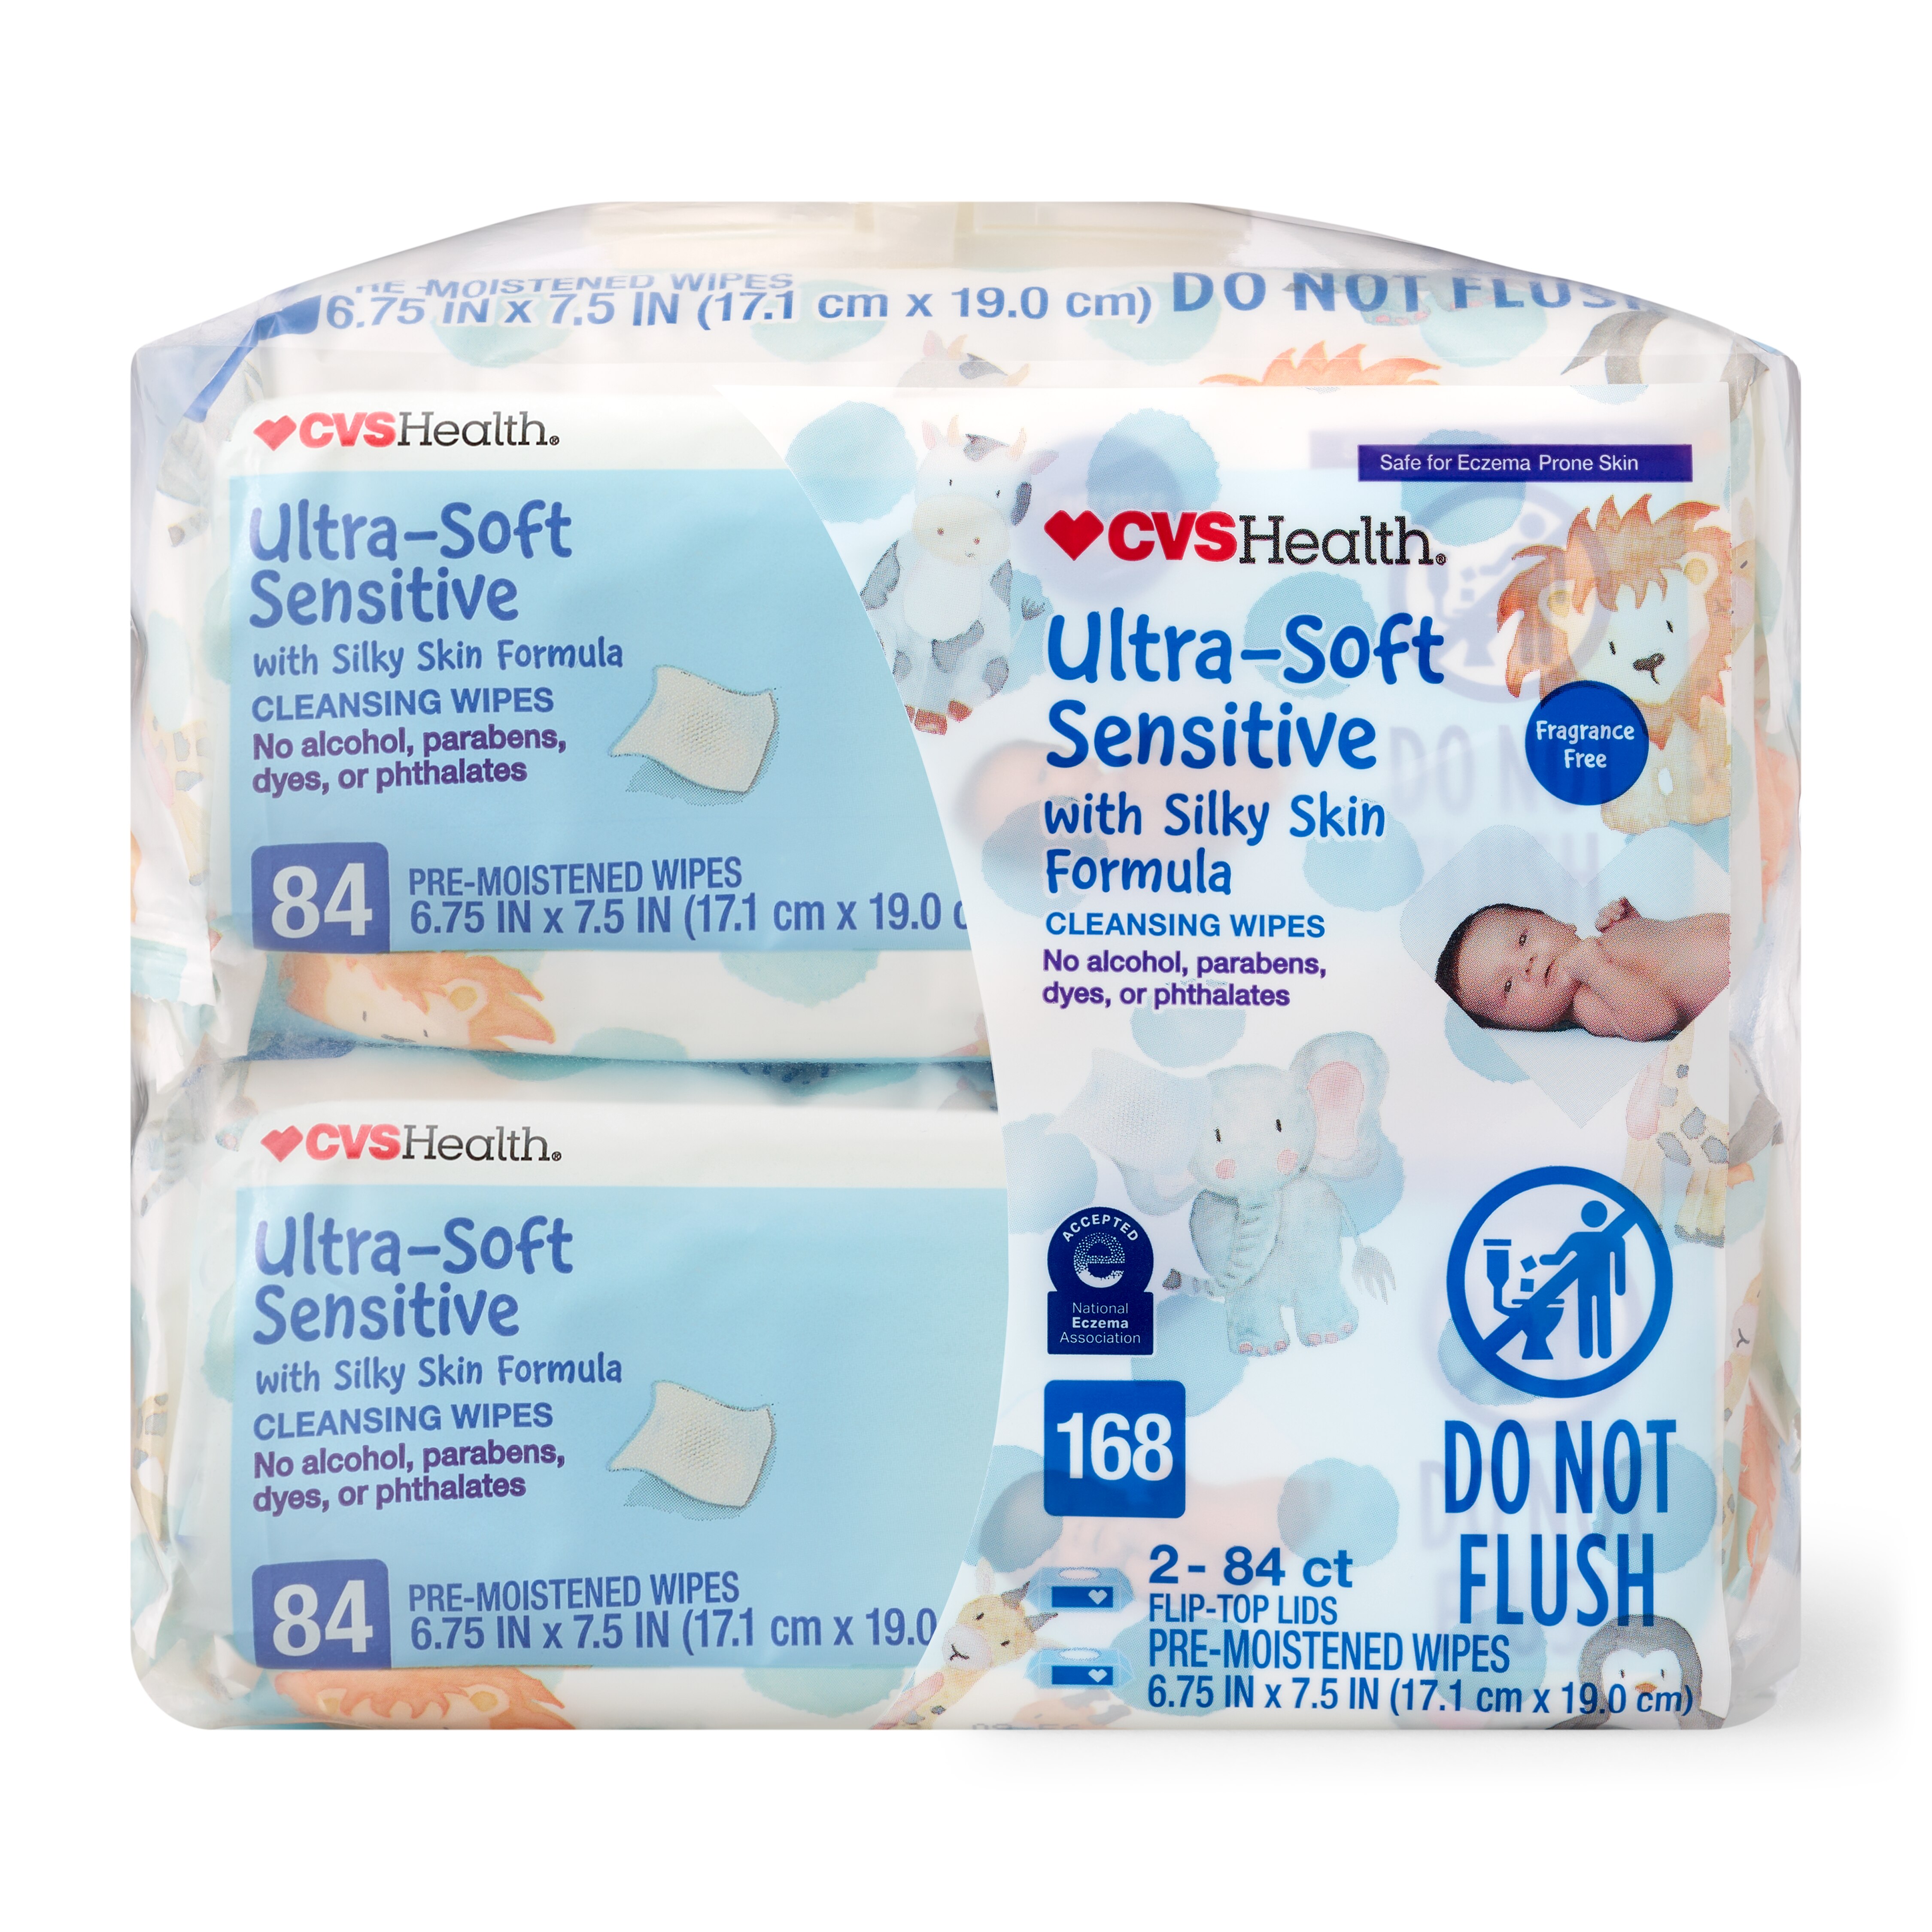 CVS Health Ultra-Soft Sensitive Cleansing Wipes, 84 CT, 2 Pack